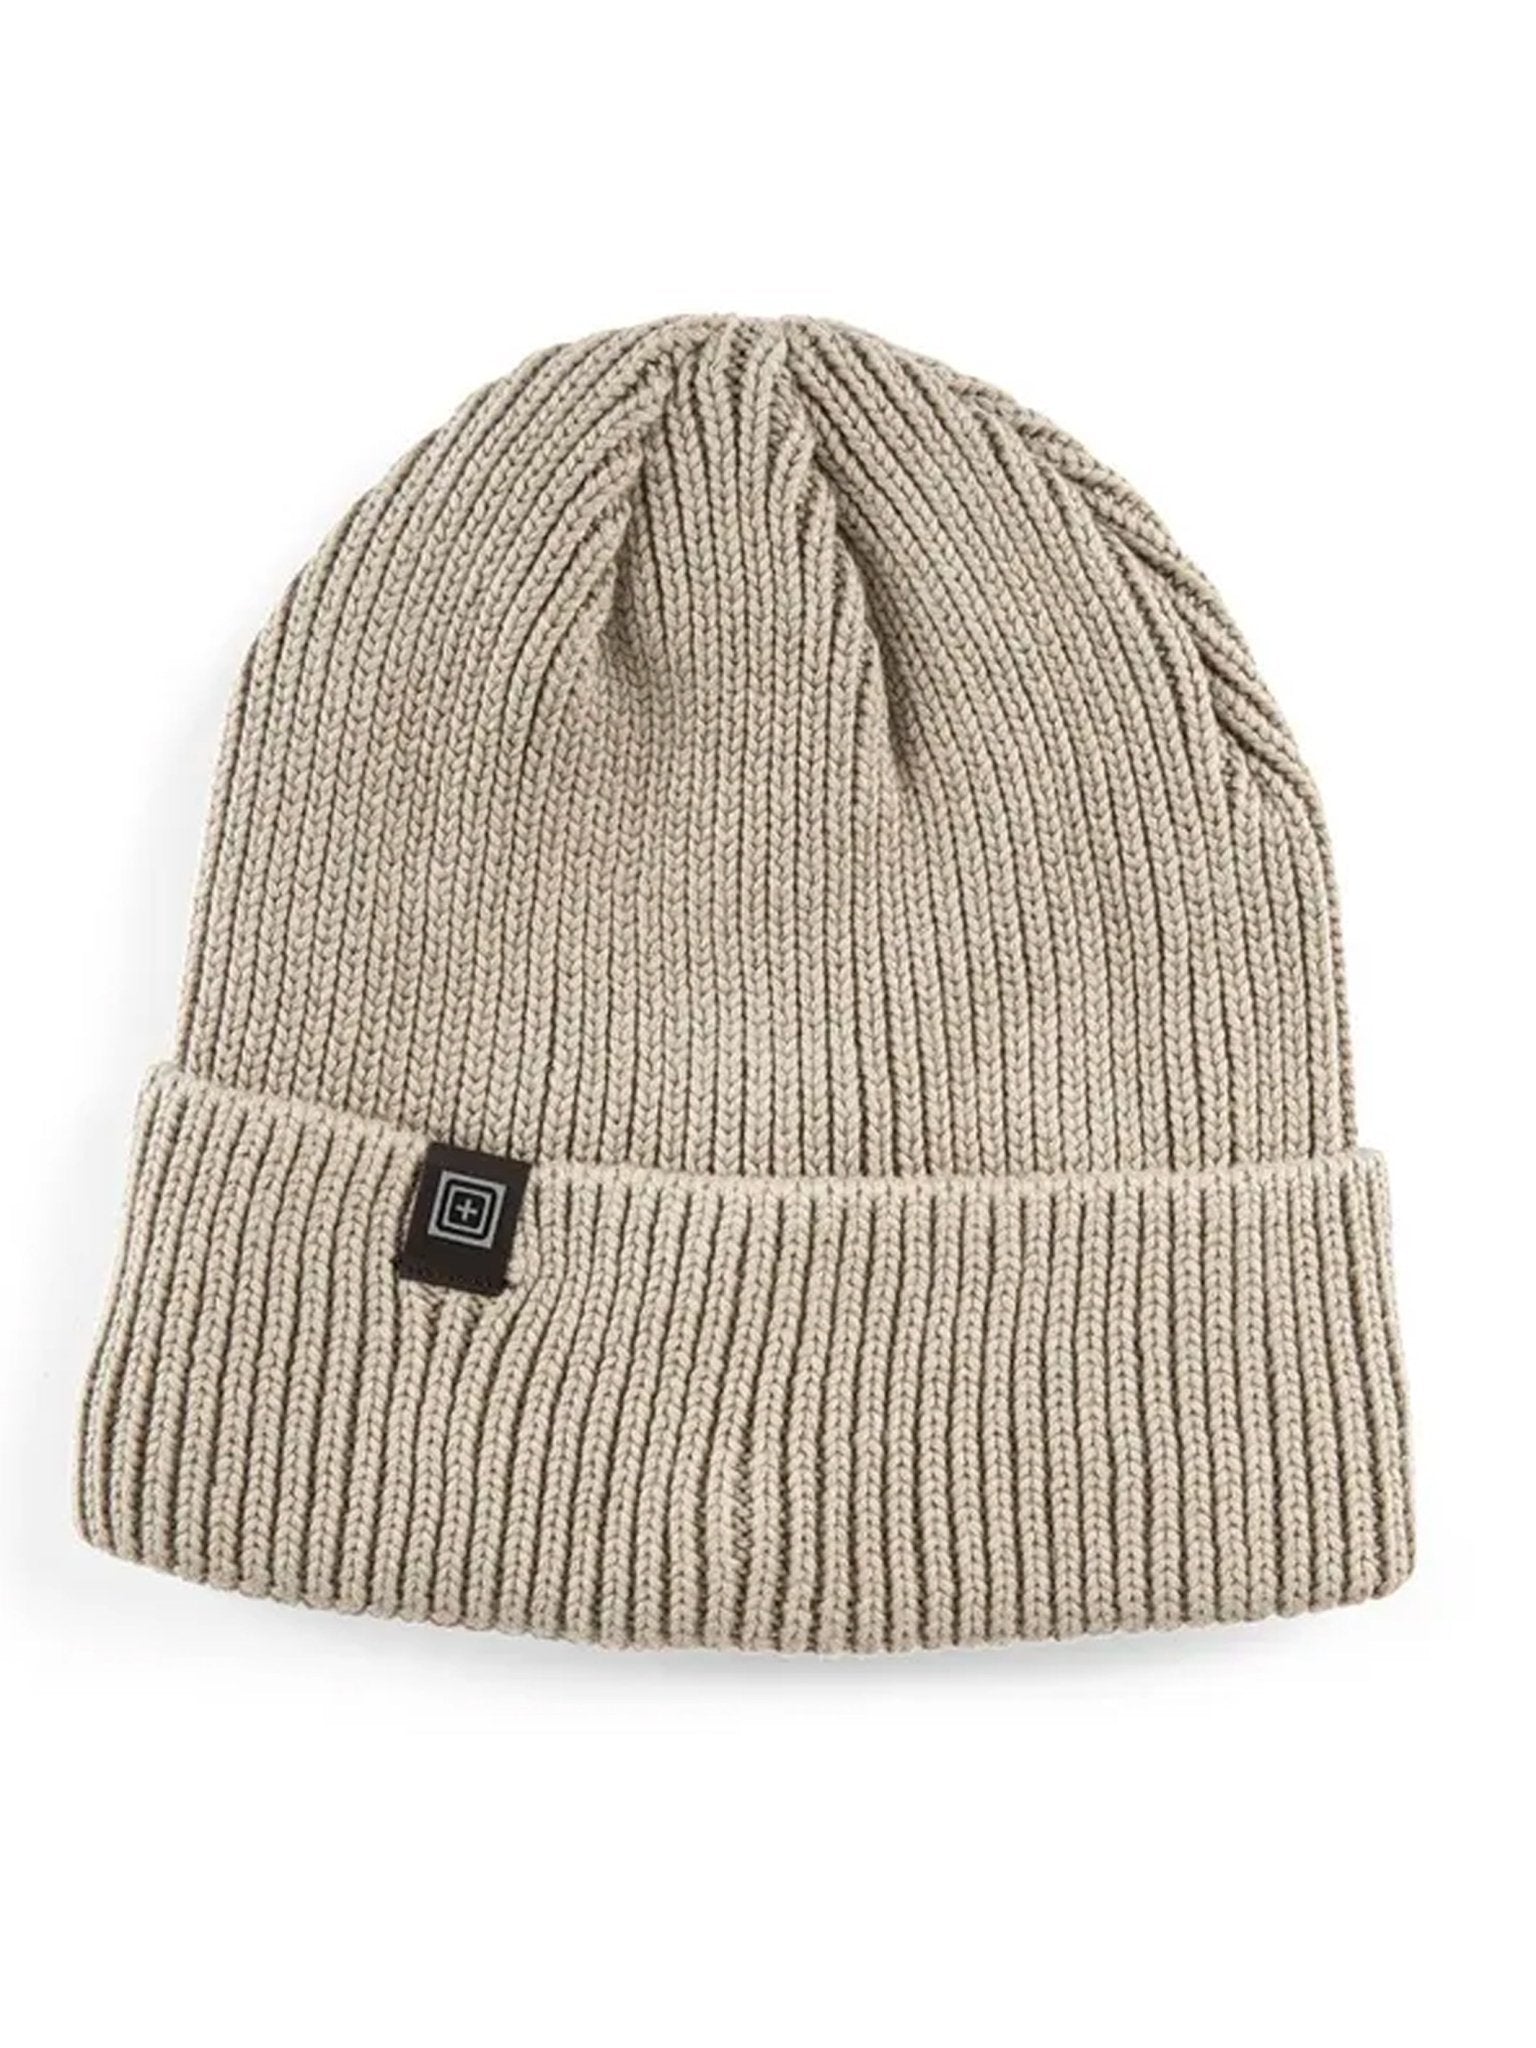 4elementsclothing5.11 Tactical5.11 Tactical - 5.11 Tactical Cotton Knitted Boistel Beanie Hat - Style 89163Hats89163-256